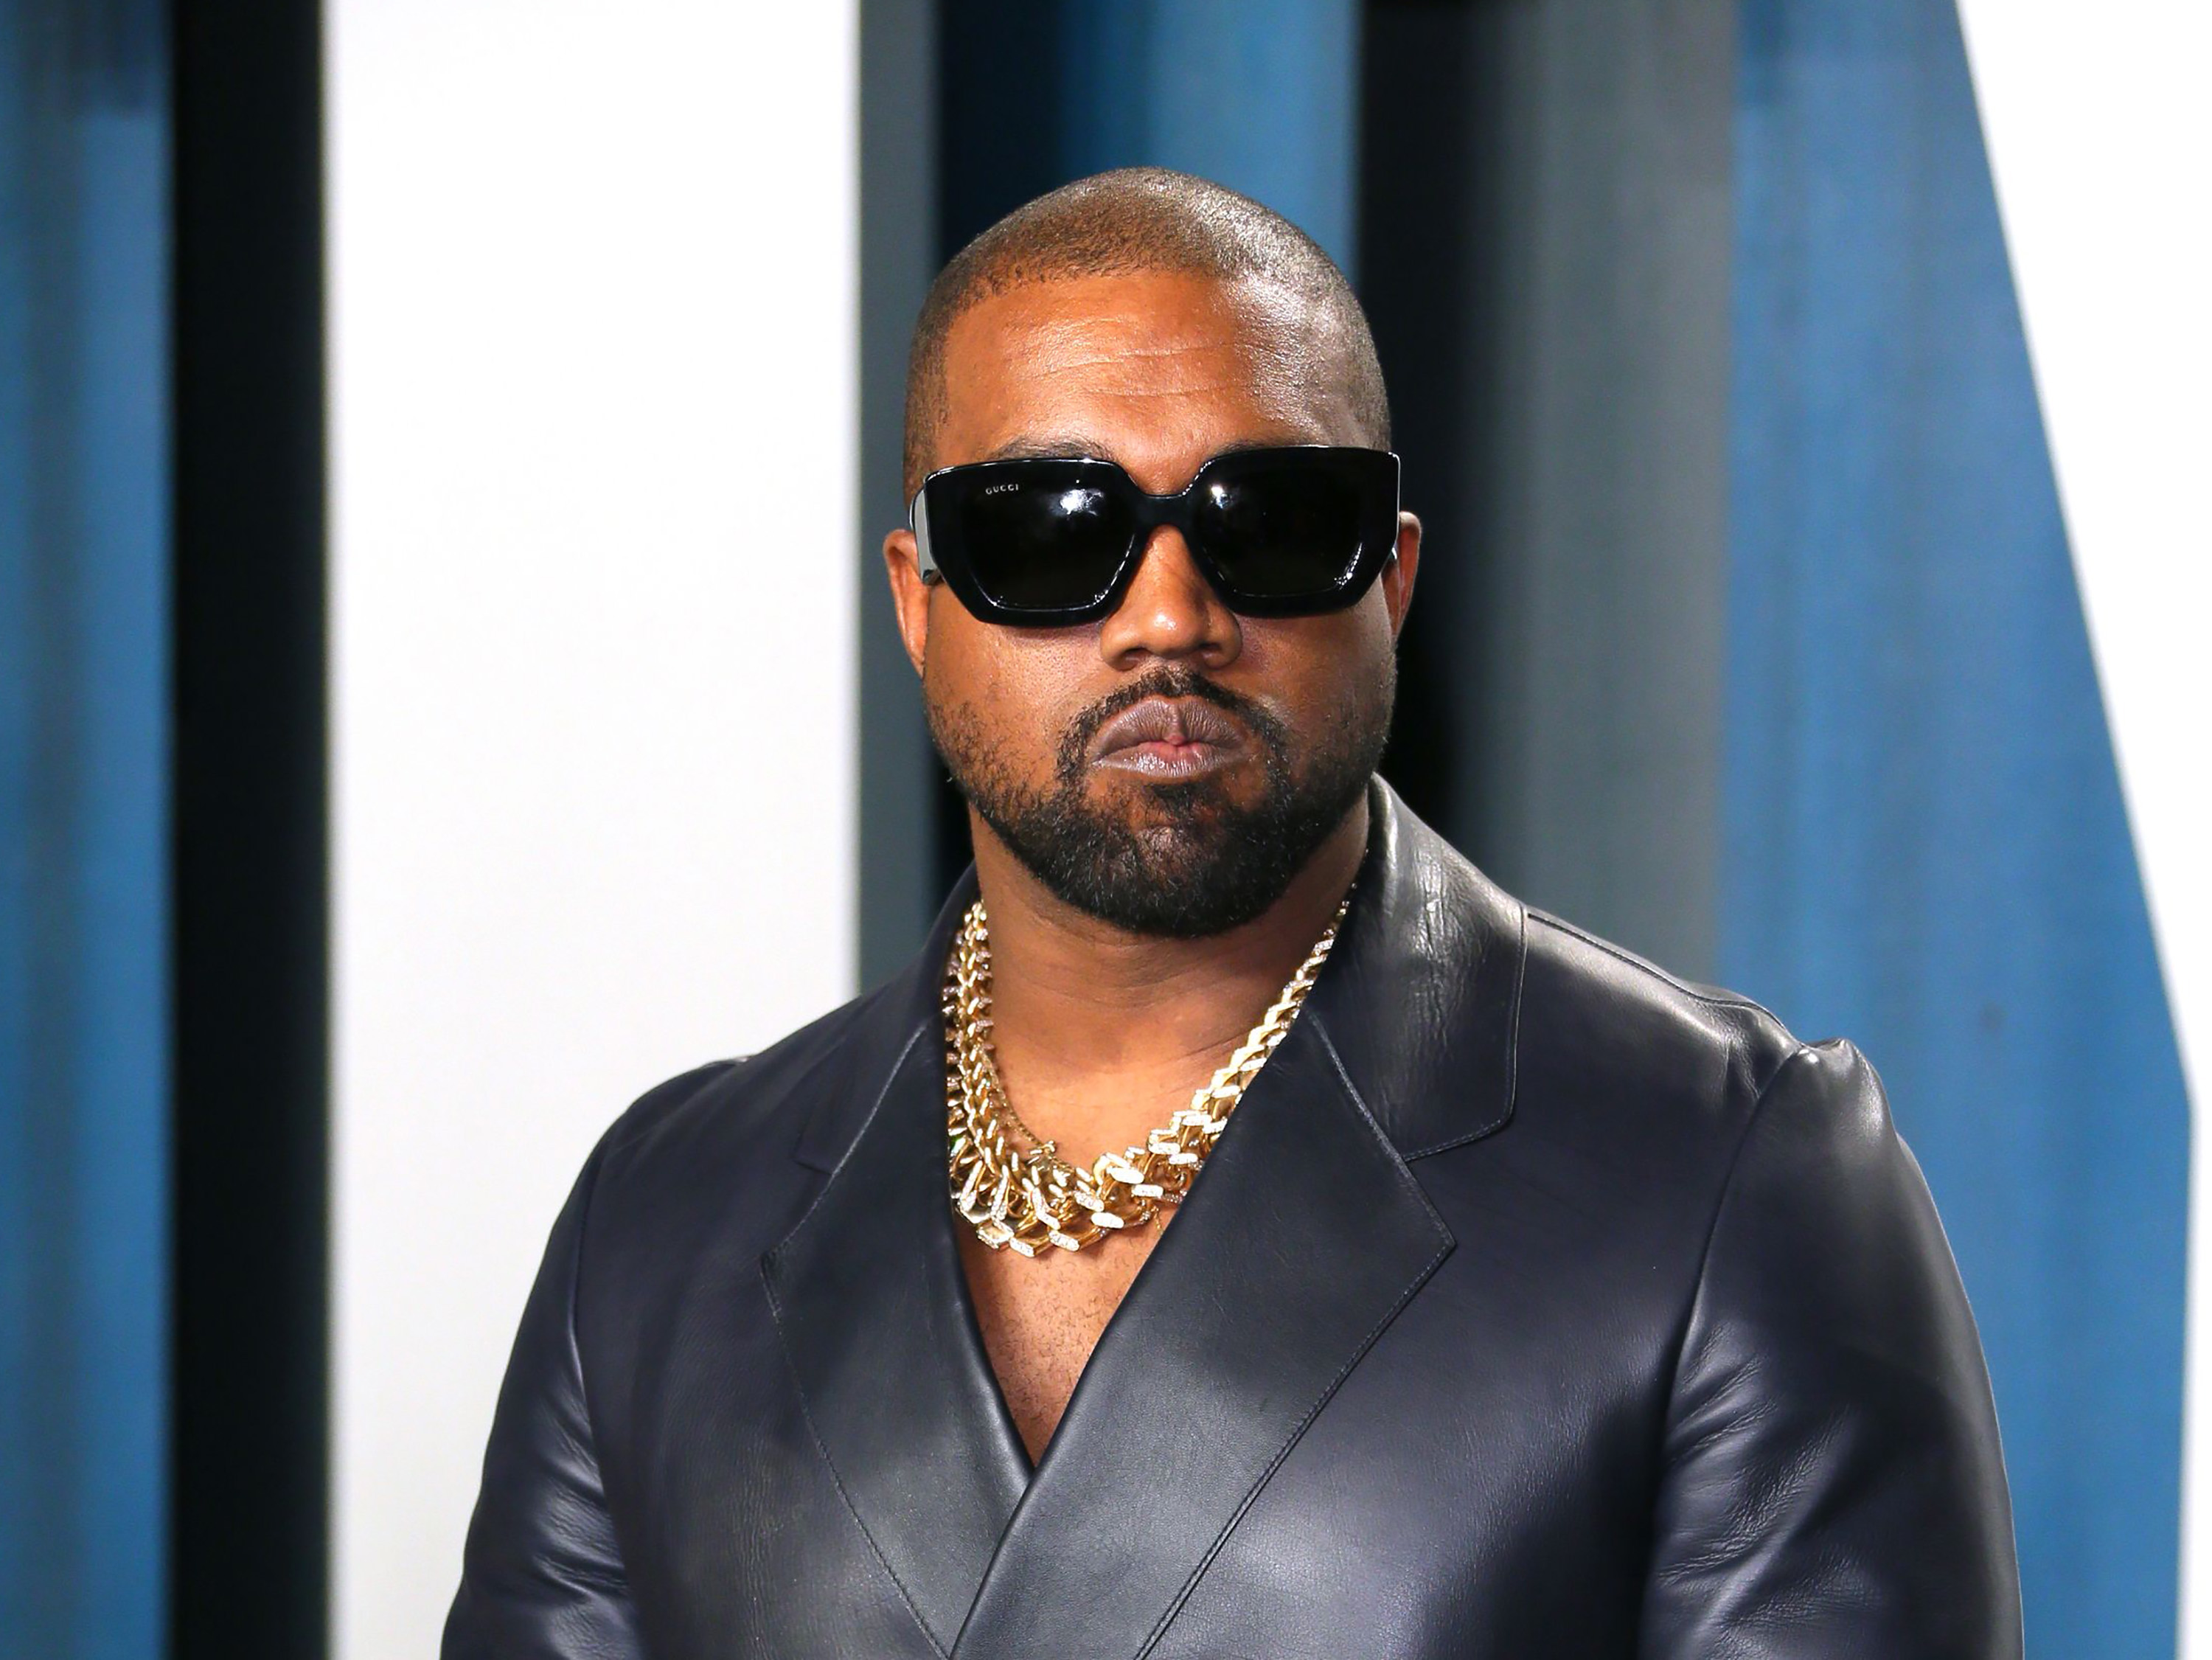 From Kanye to Ye : 5 Signs Your Business Needs a New Identity